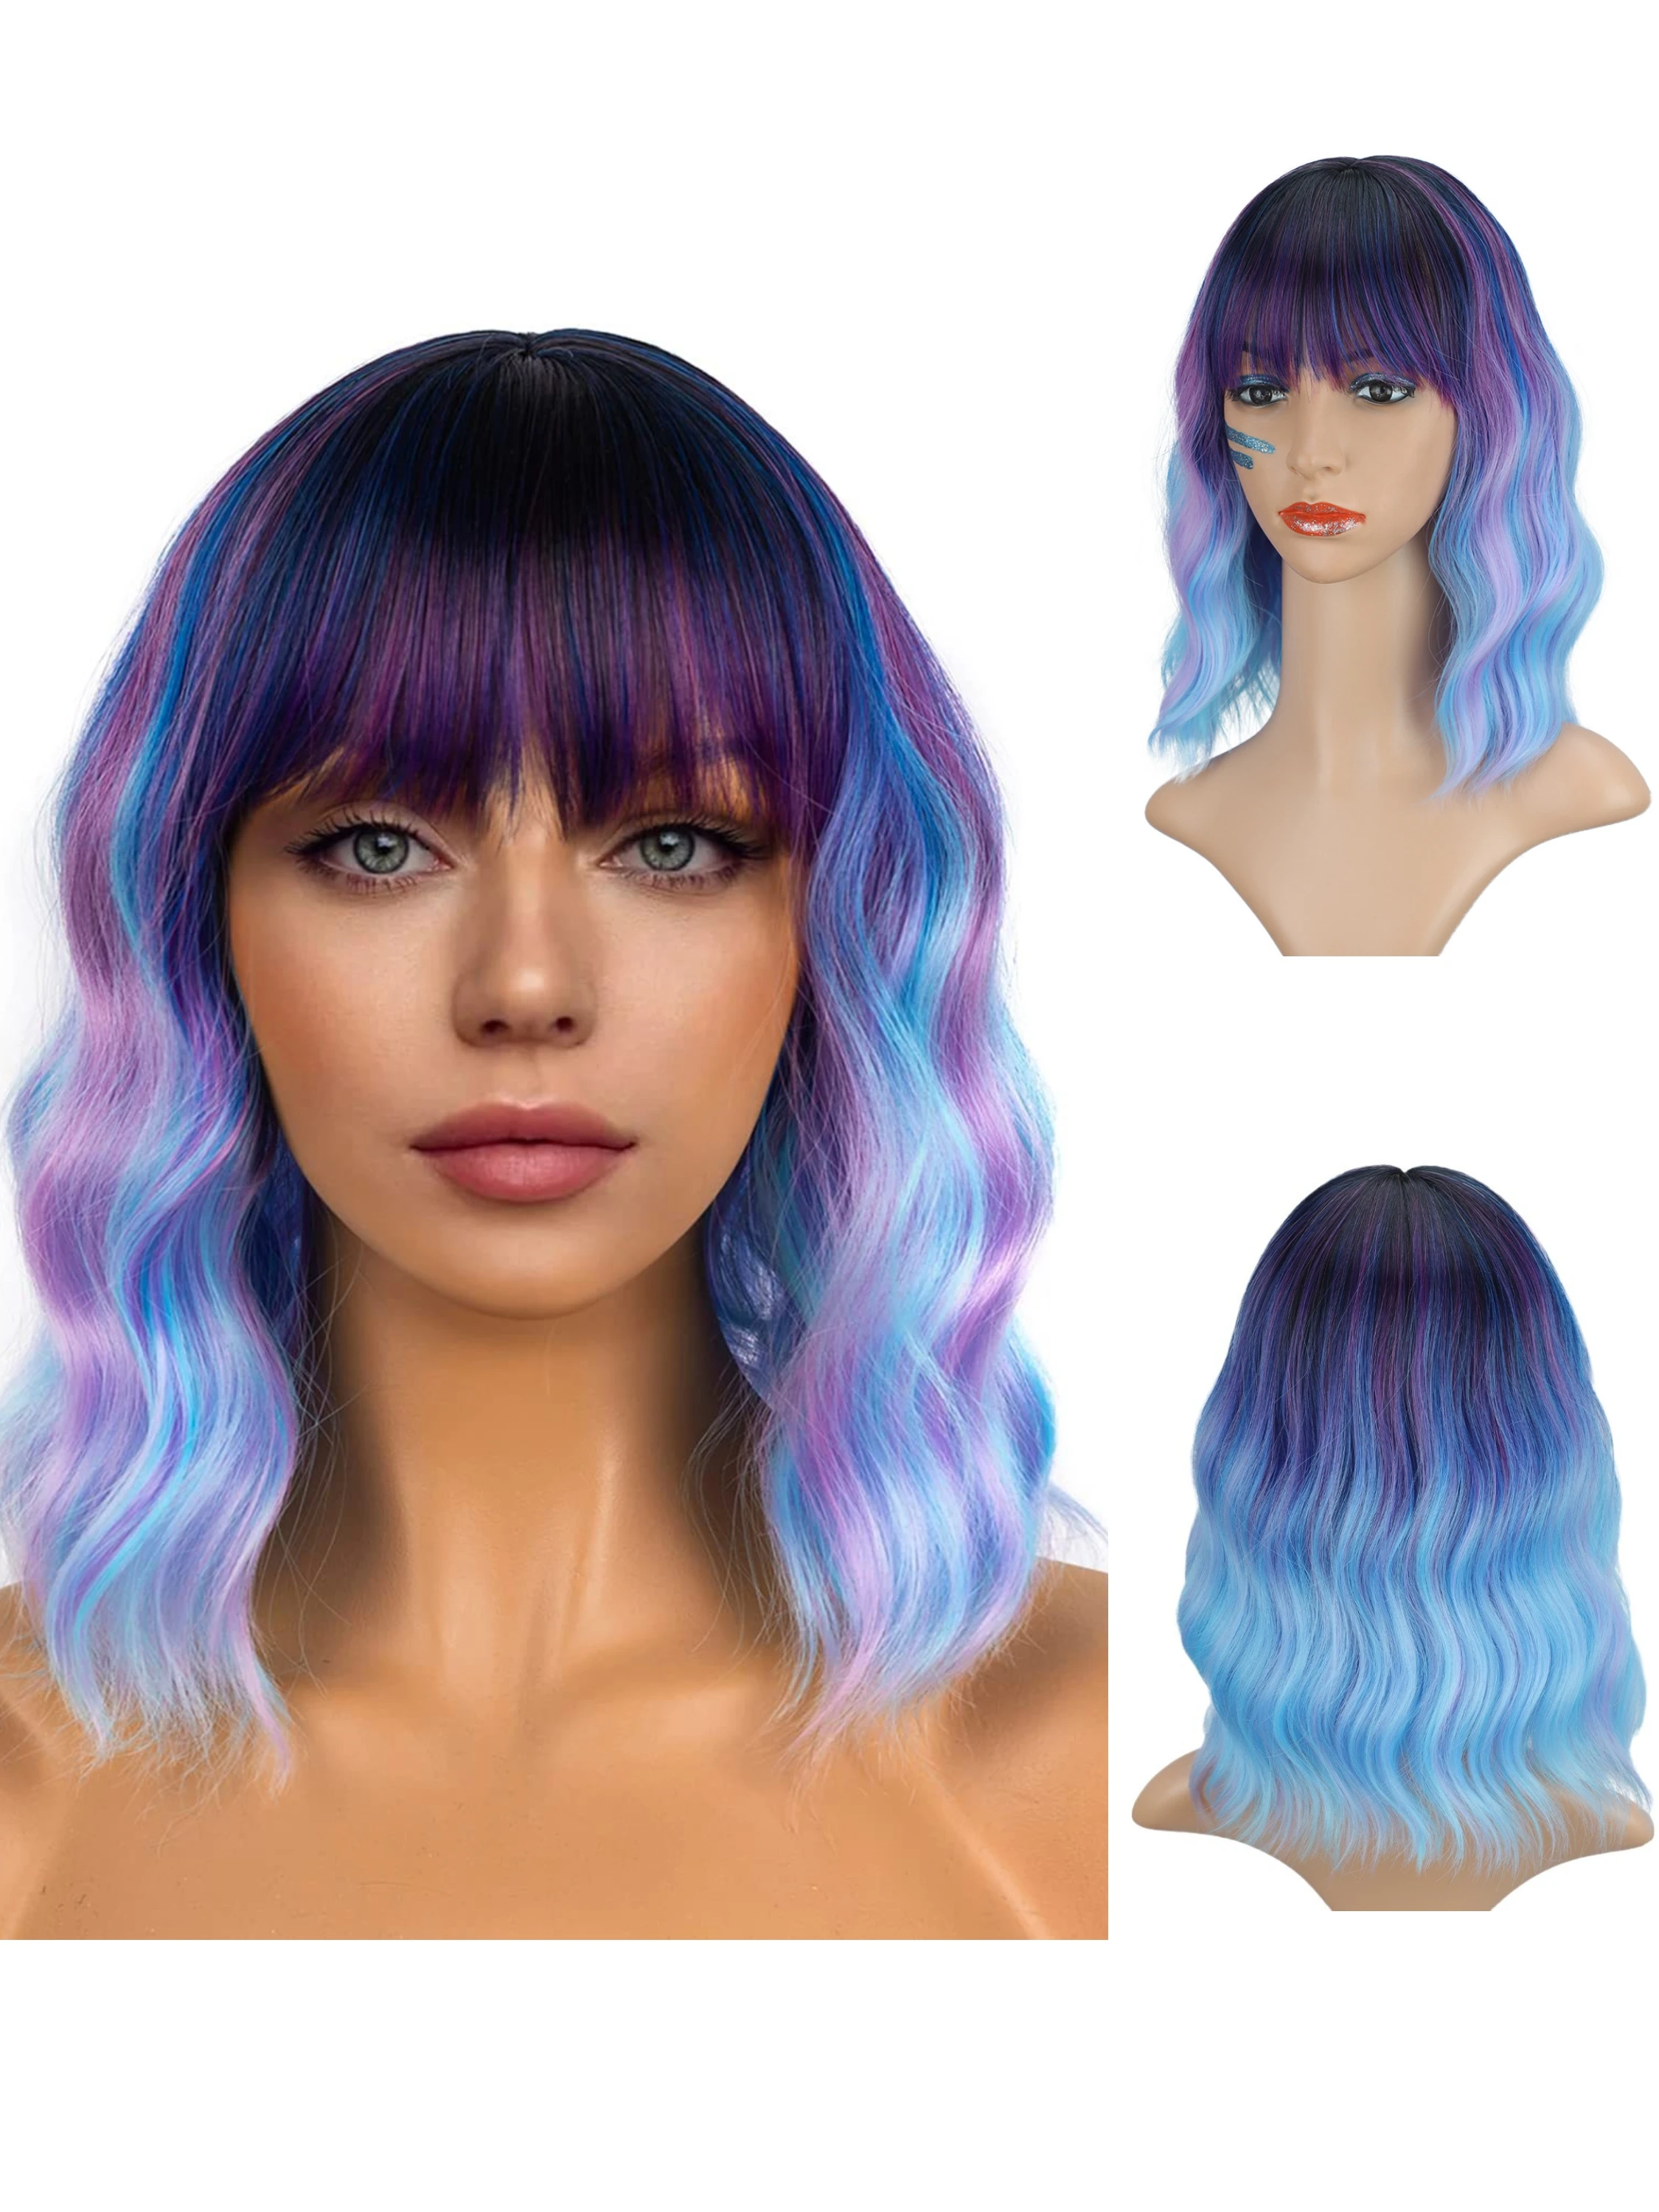 LO Water Wave 180% Curly Wig Purple Mixed Blue Synthetic Wig 14 Inch Party Holiday Styling Blue hairpink hair Cosplay Pink wig дезодорант mon platin blue wave 80 мл